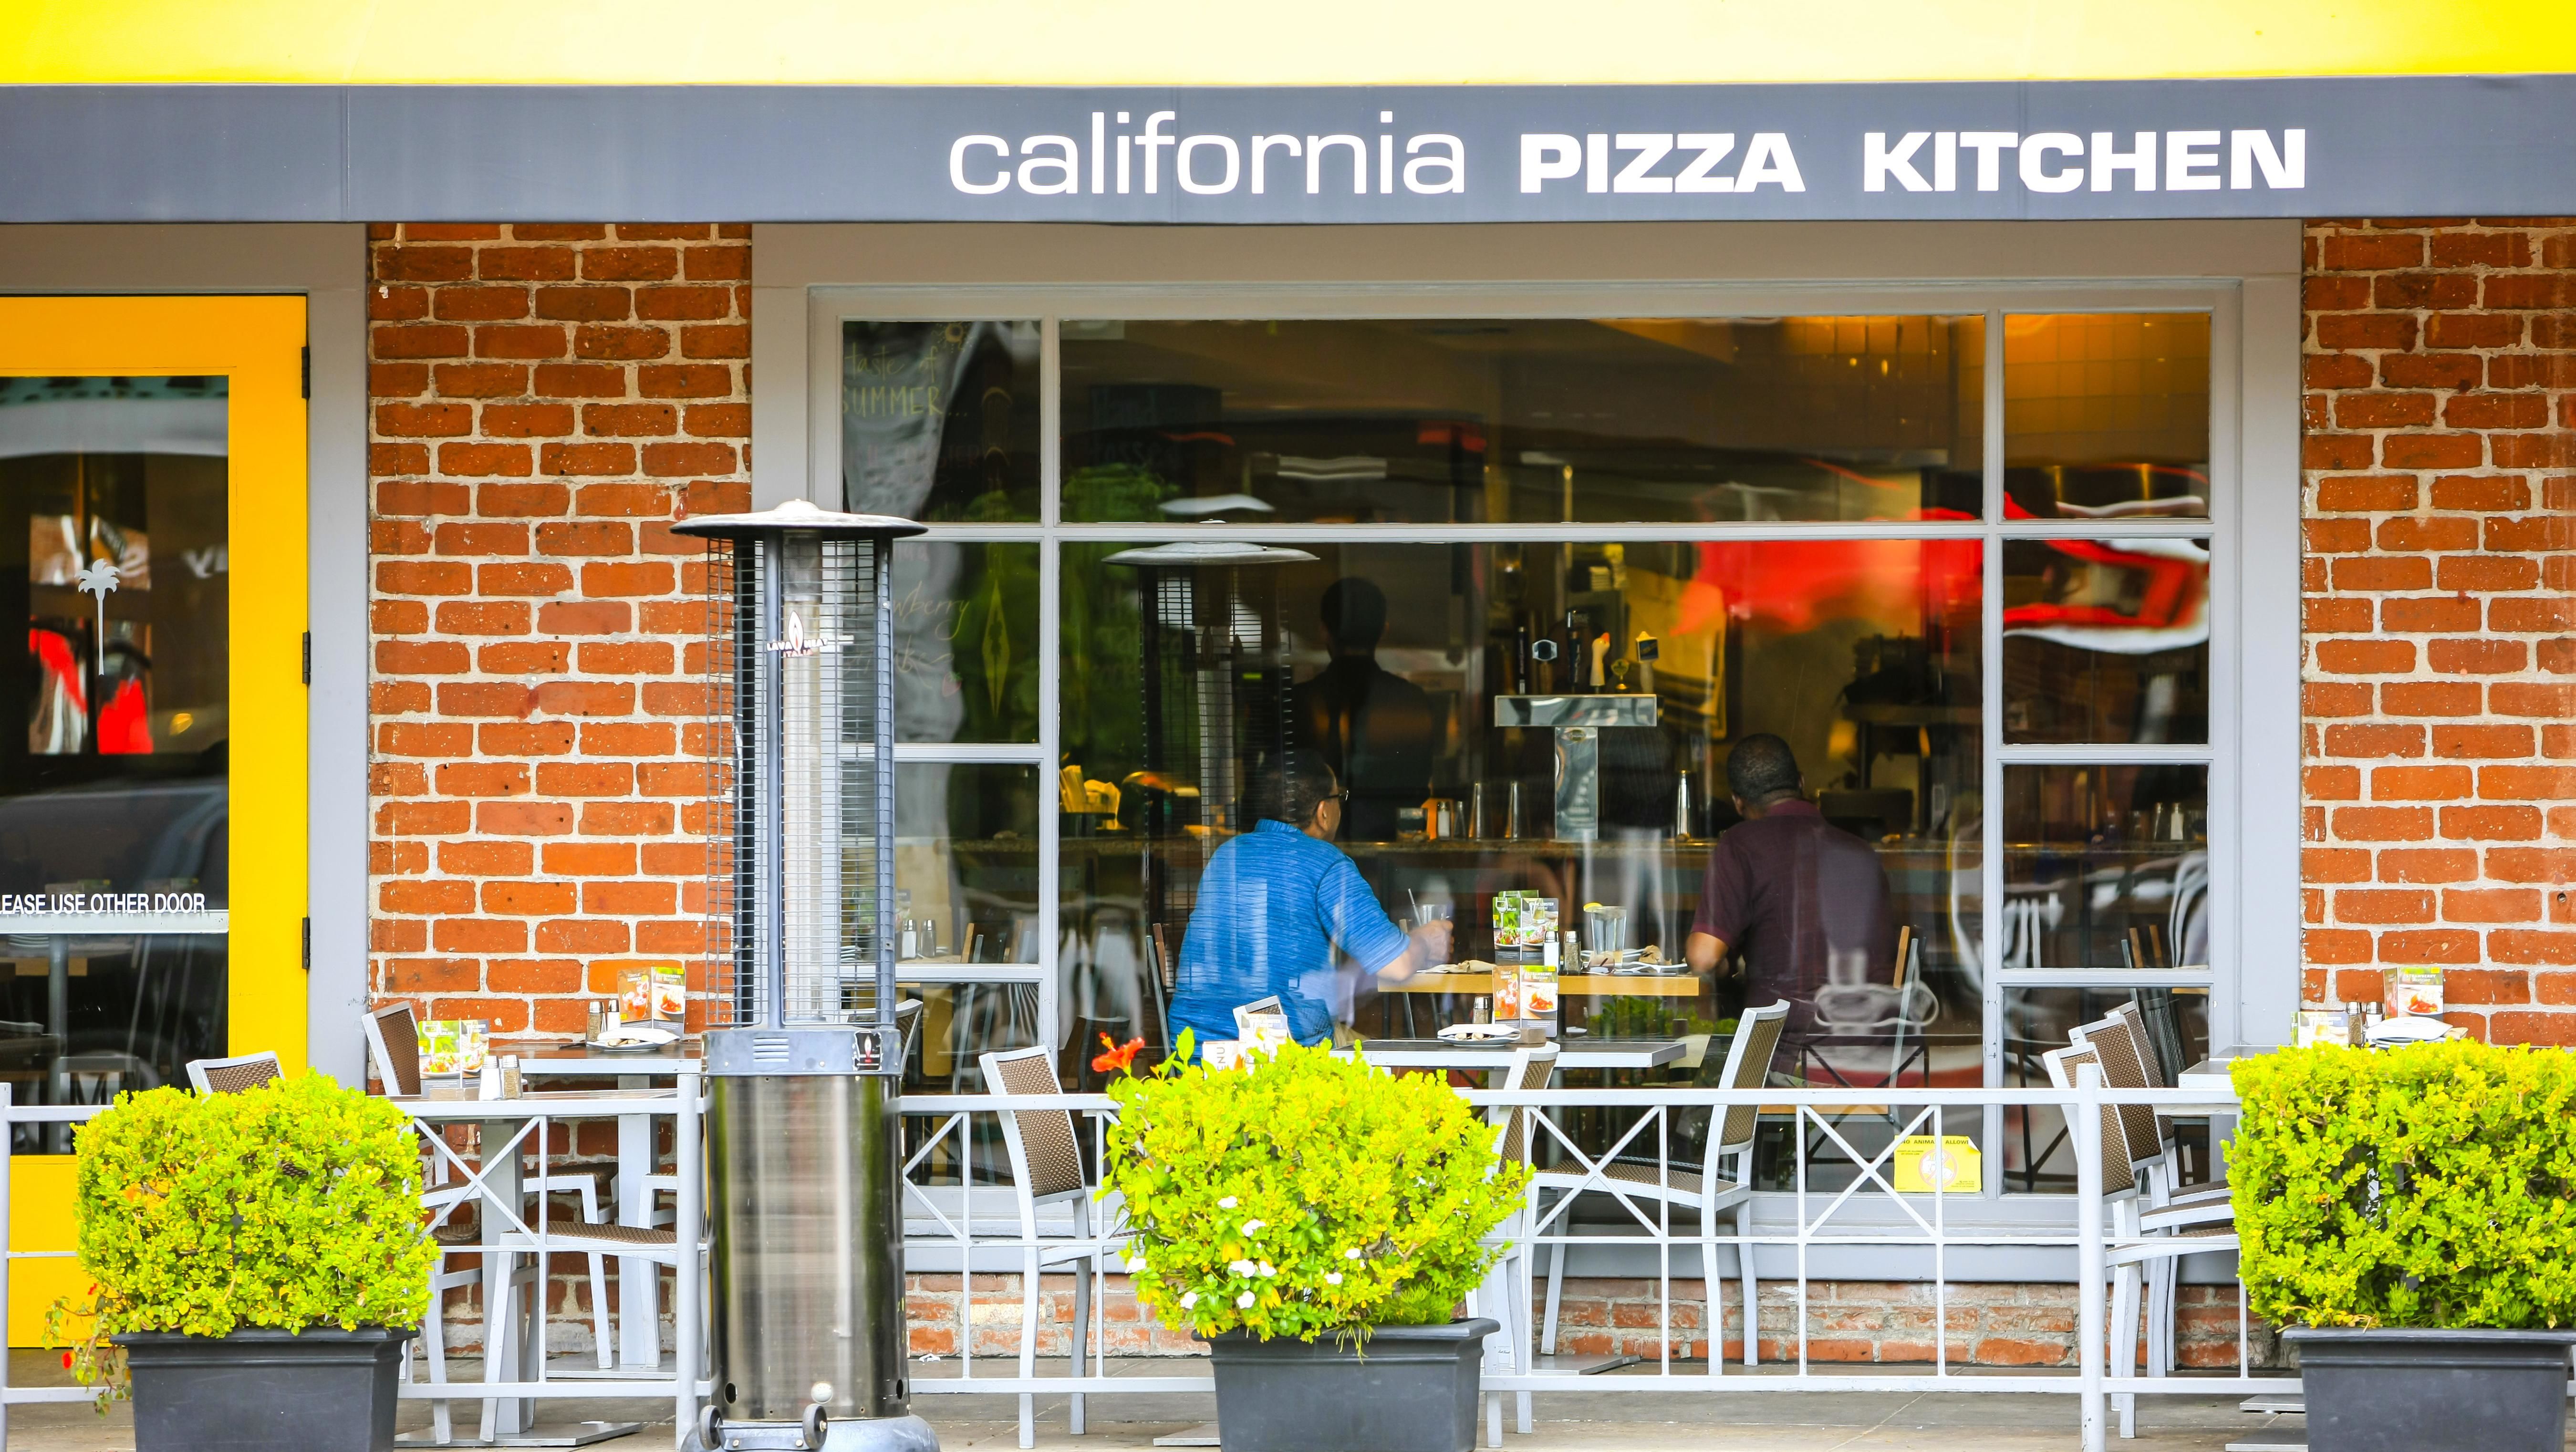 News On The Move California Pizza Kitchen To File For Bankruptcy